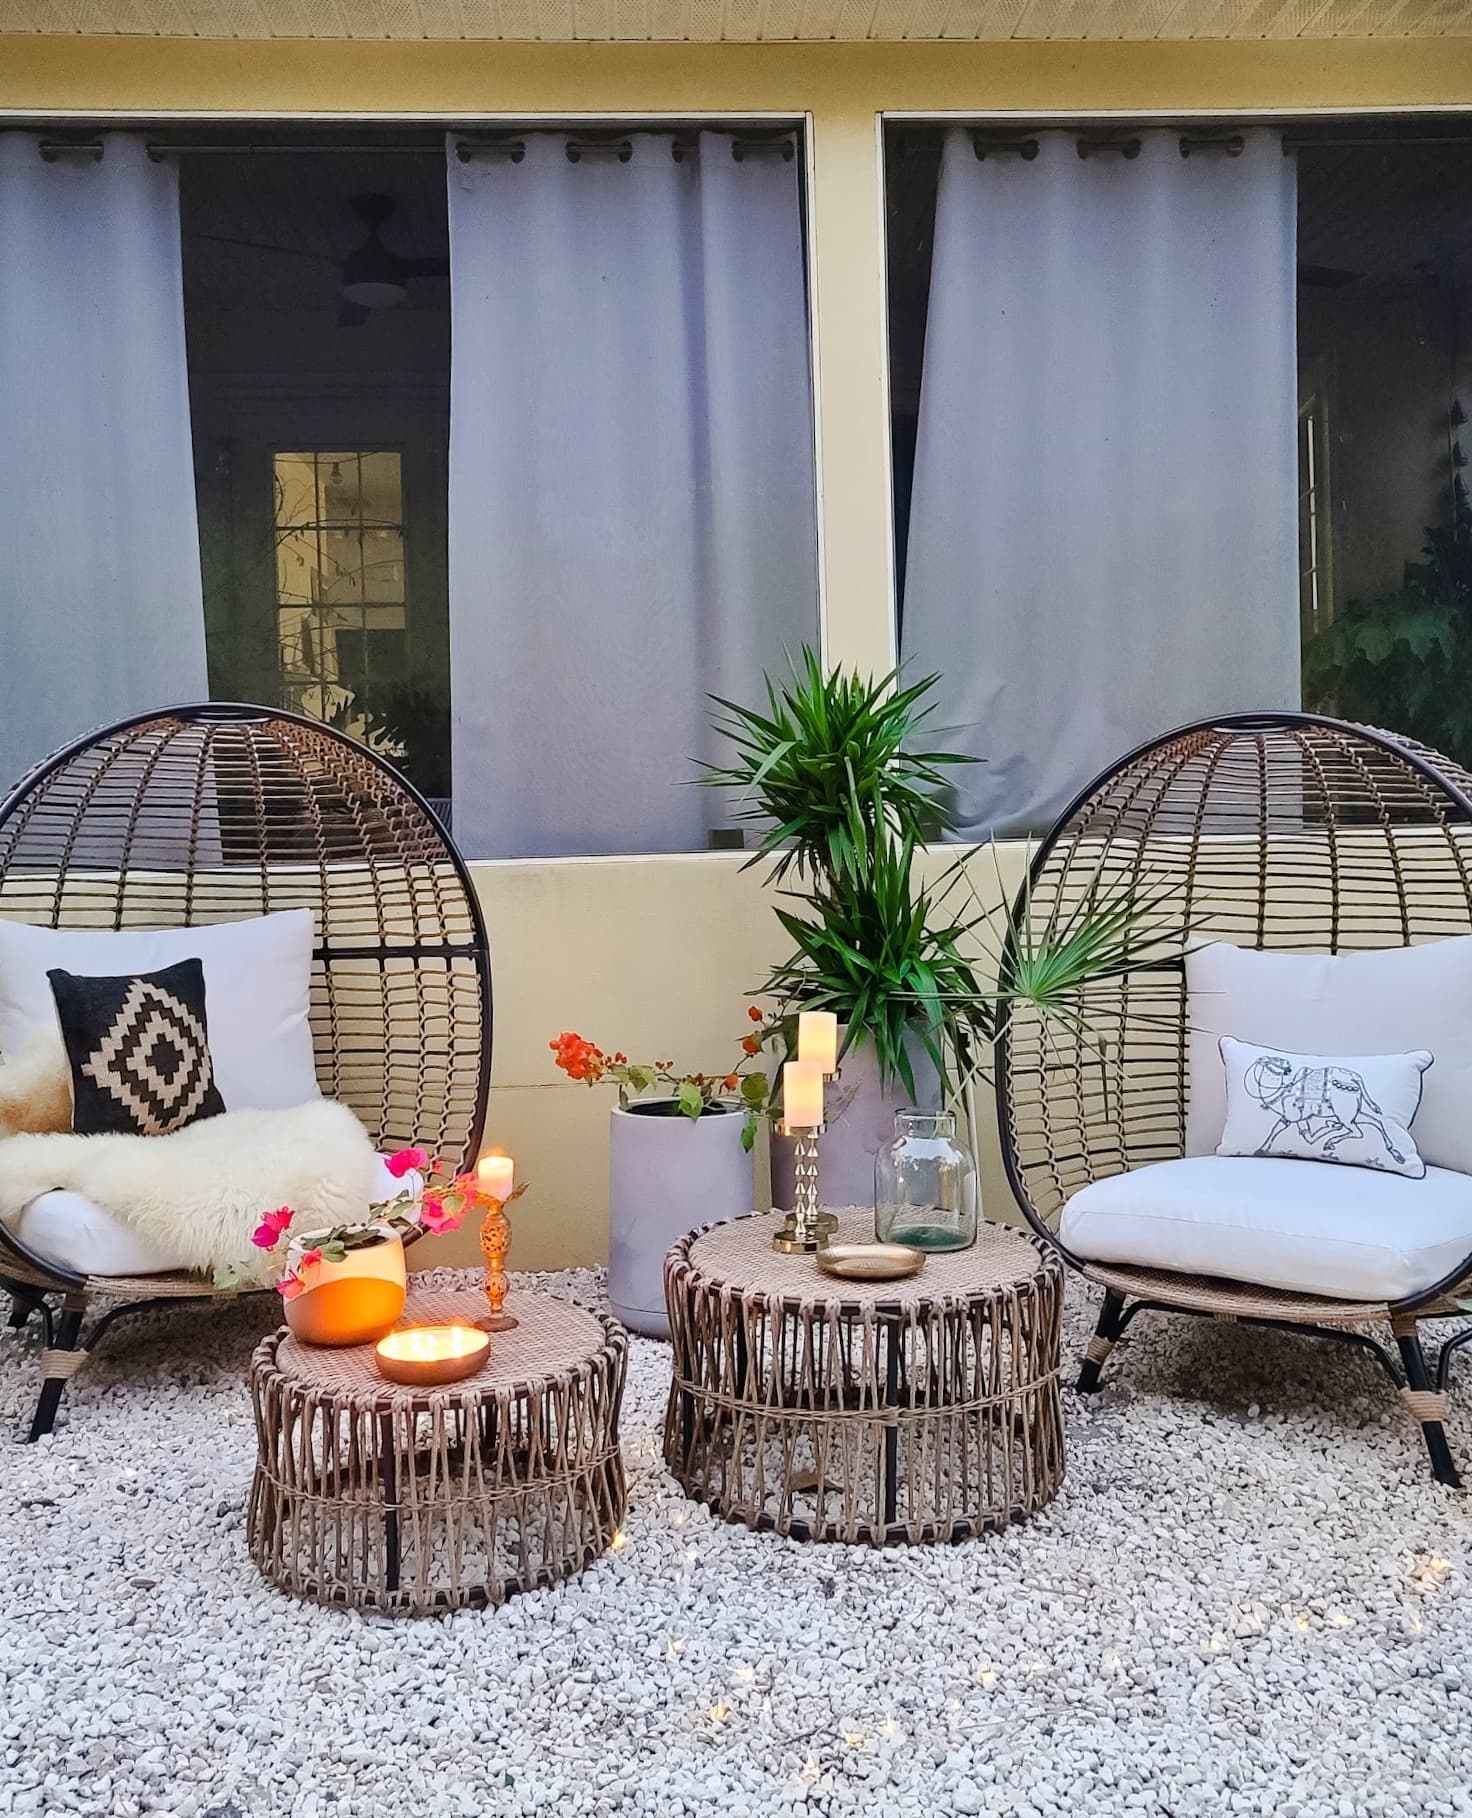 Backyard oasis patio egg chairs with wicker coffee tables gold accents flowers trees and boho chic decor